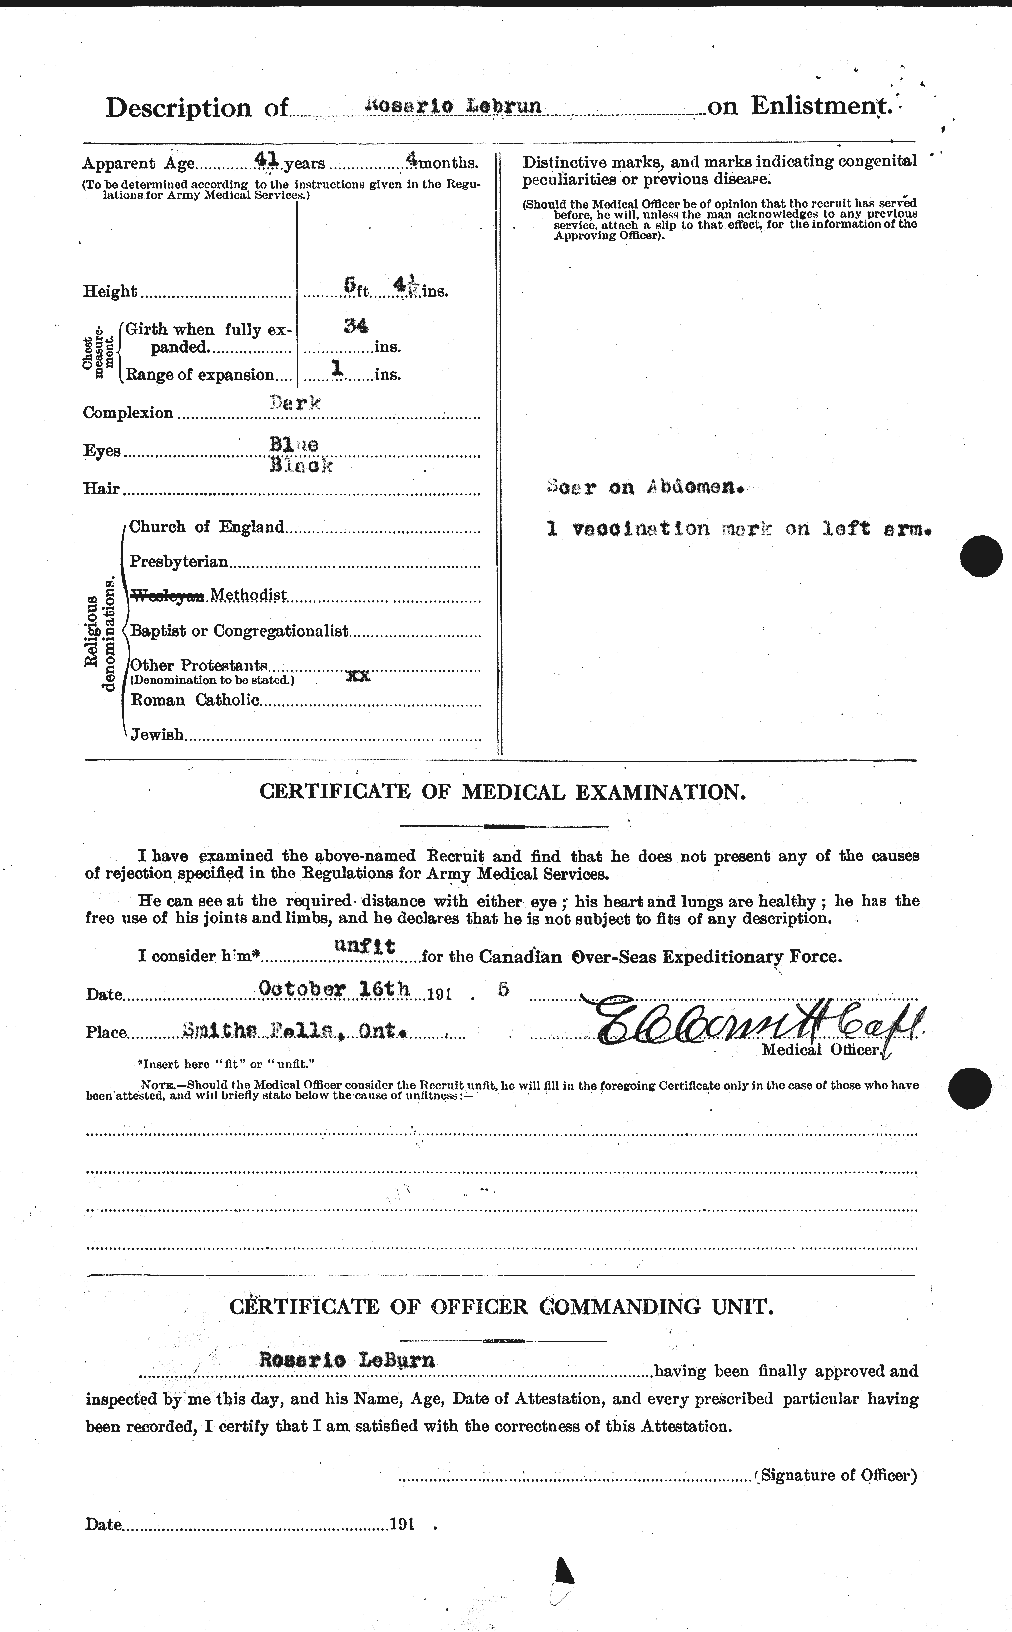 Personnel Records of the First World War - CEF 461589b